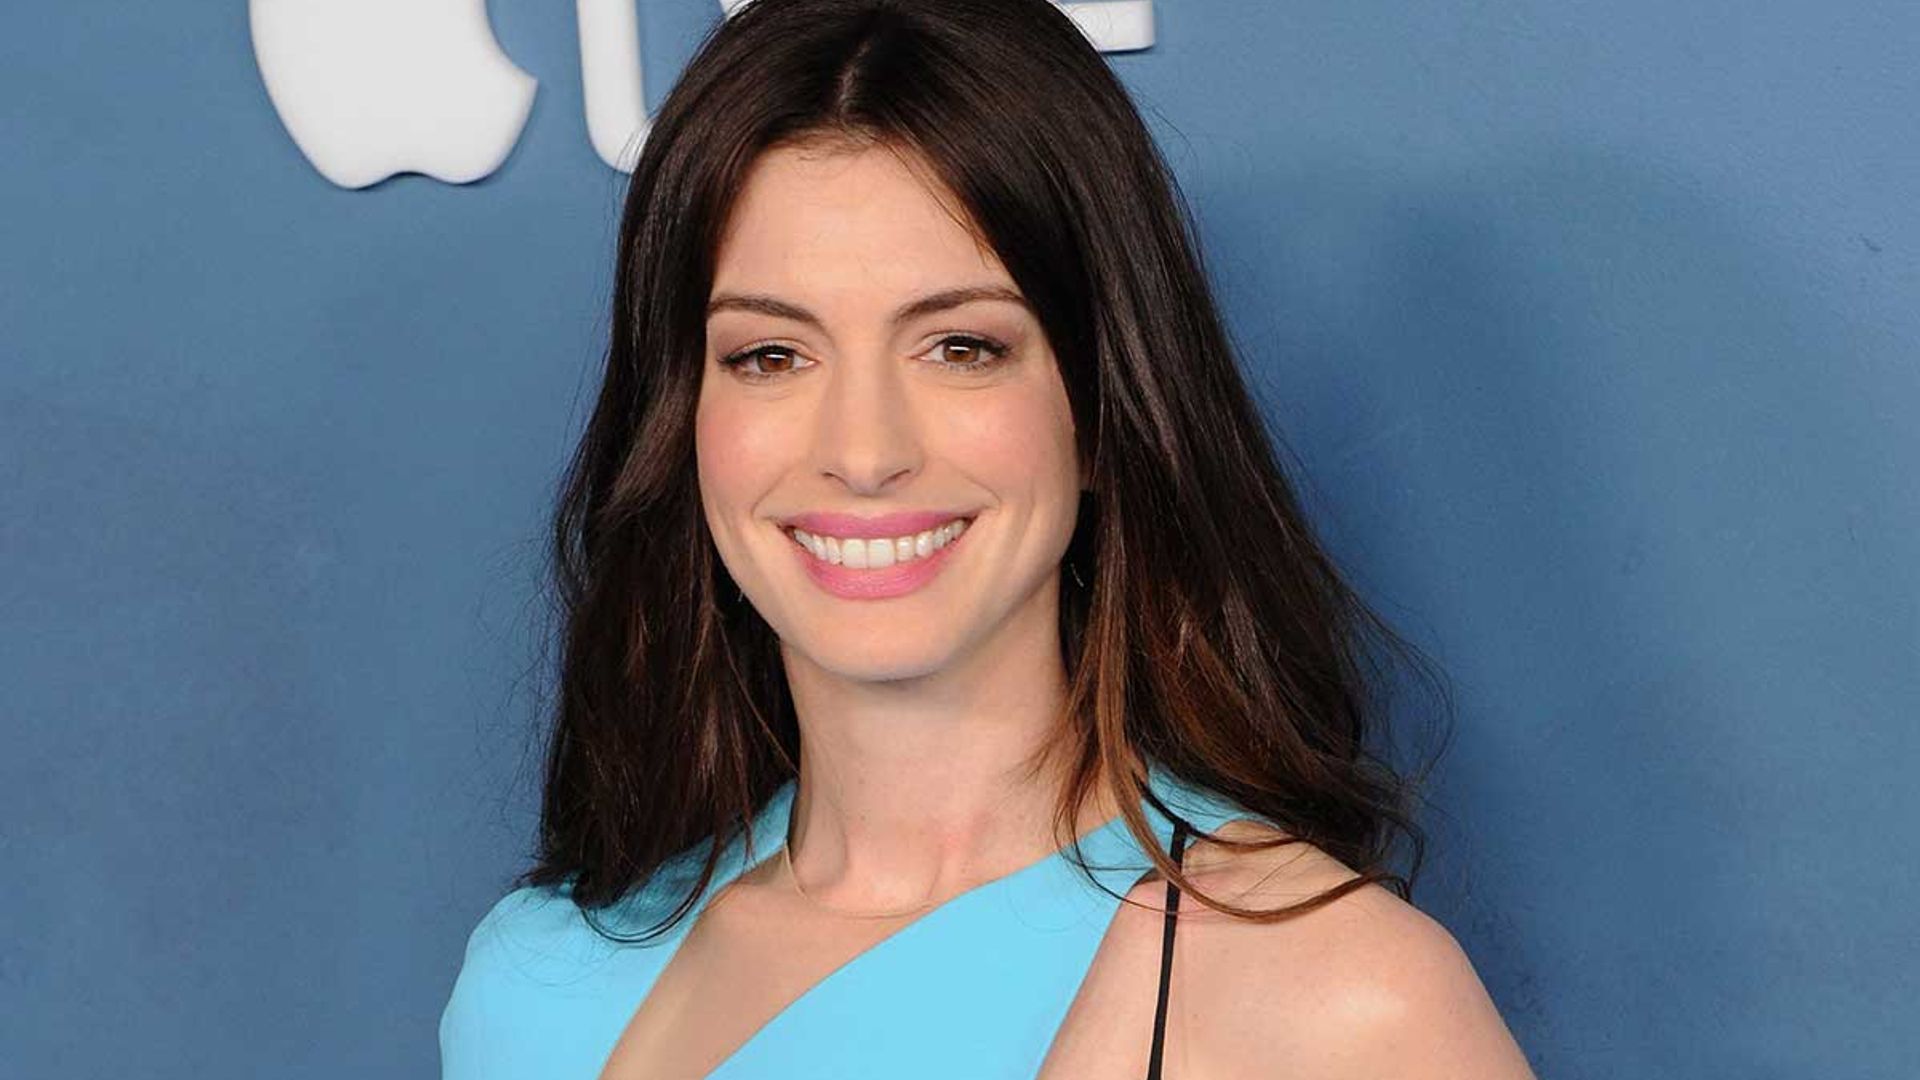 Anne Hathaway wows in stunning dress with very revealing detail